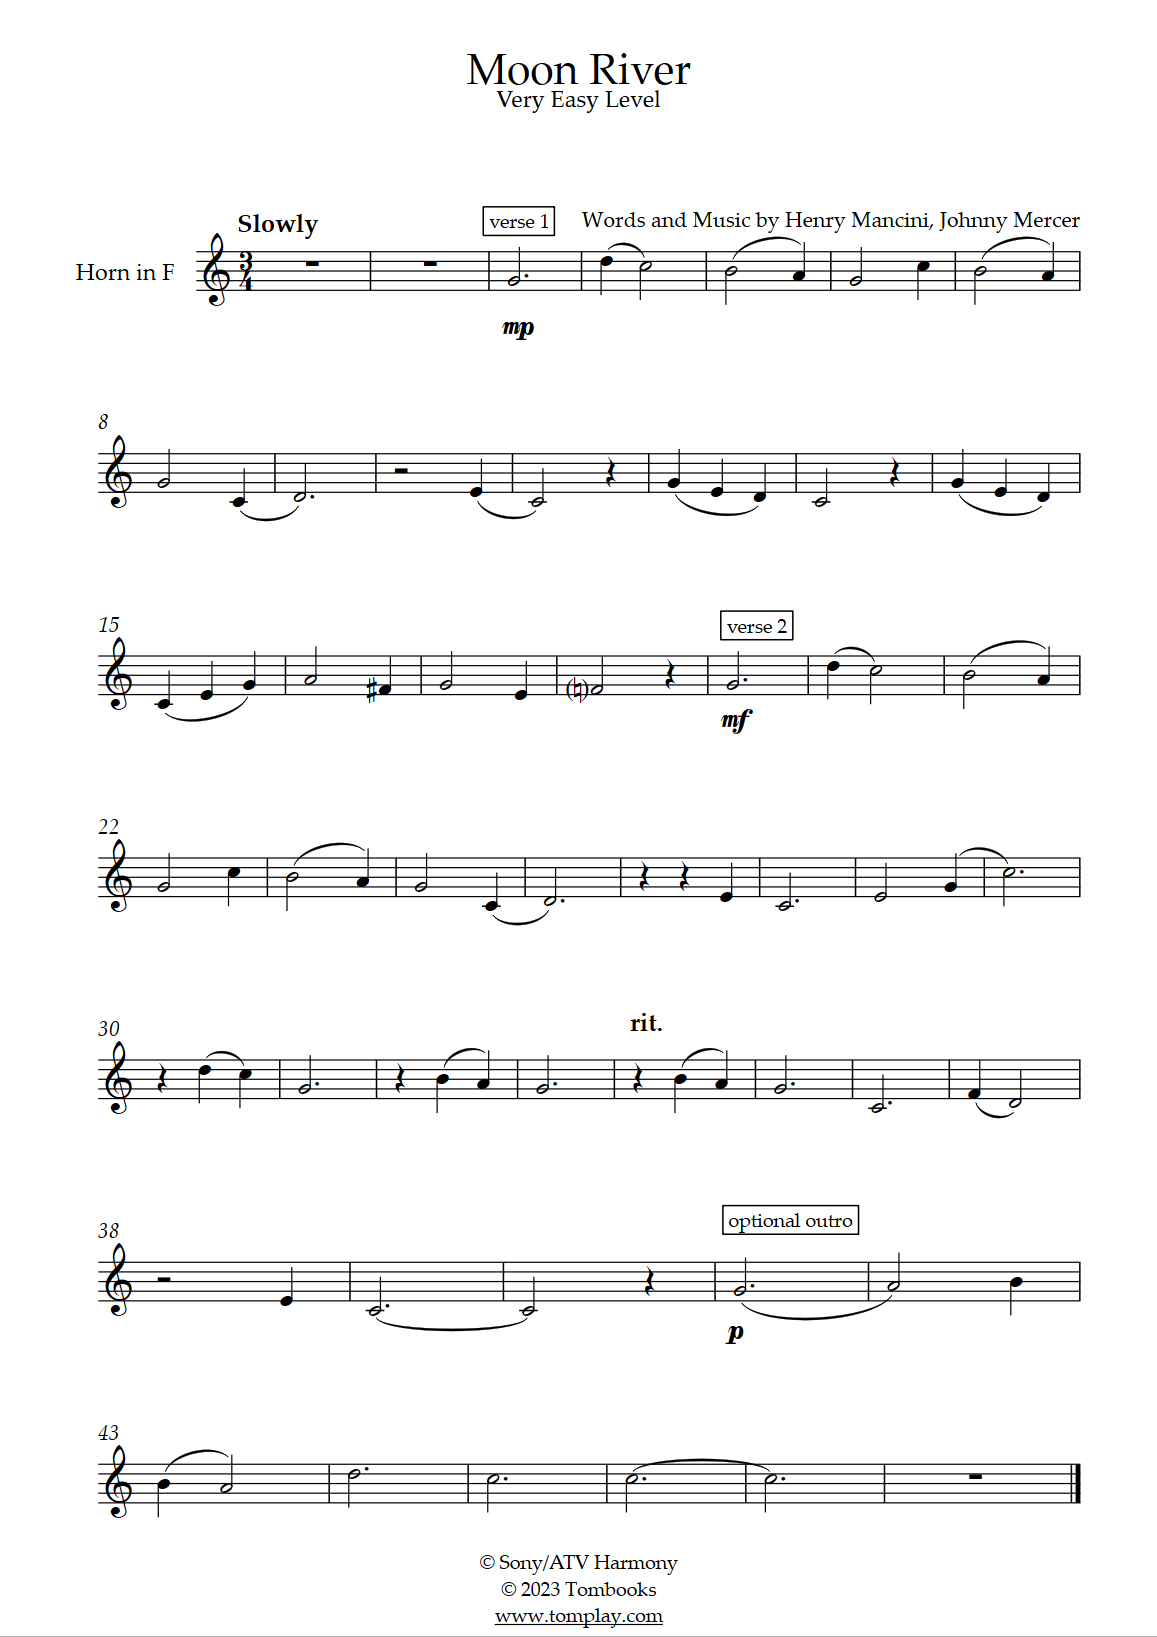 Download Digital Sheet Music of moon river for French horn